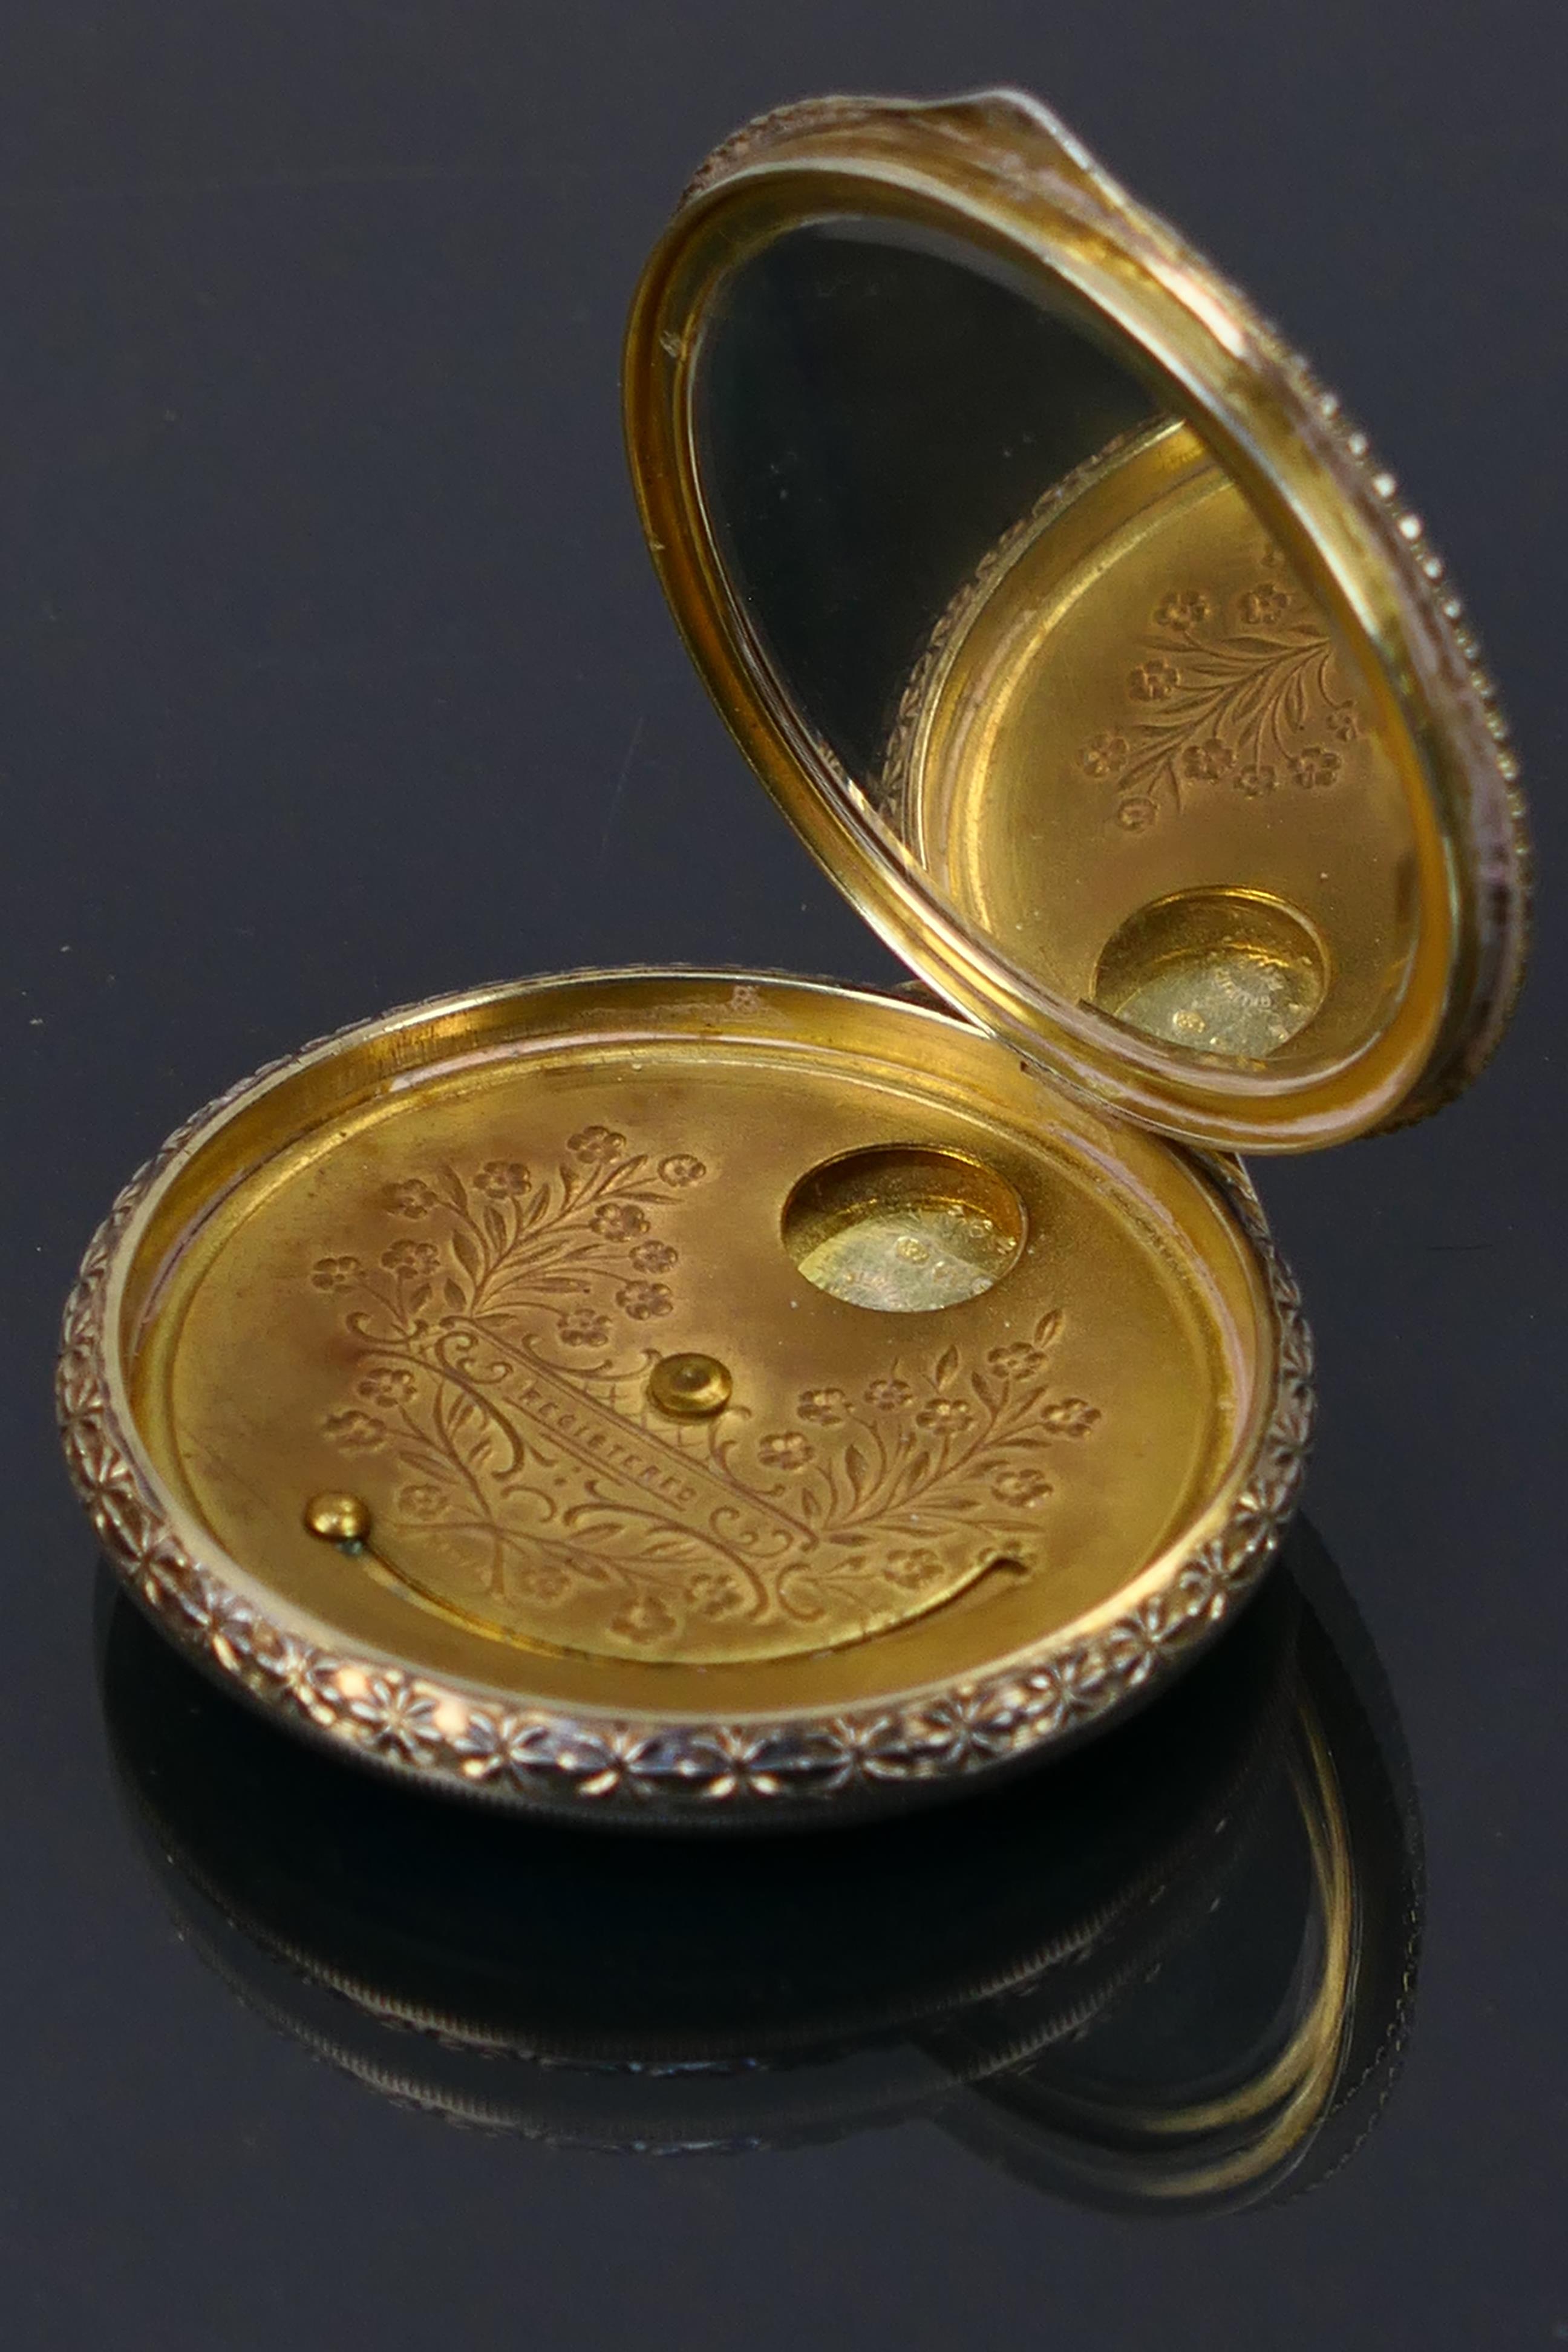 An Austrian silver (935 fineness) and enamelled powder compact. - Image 7 of 11